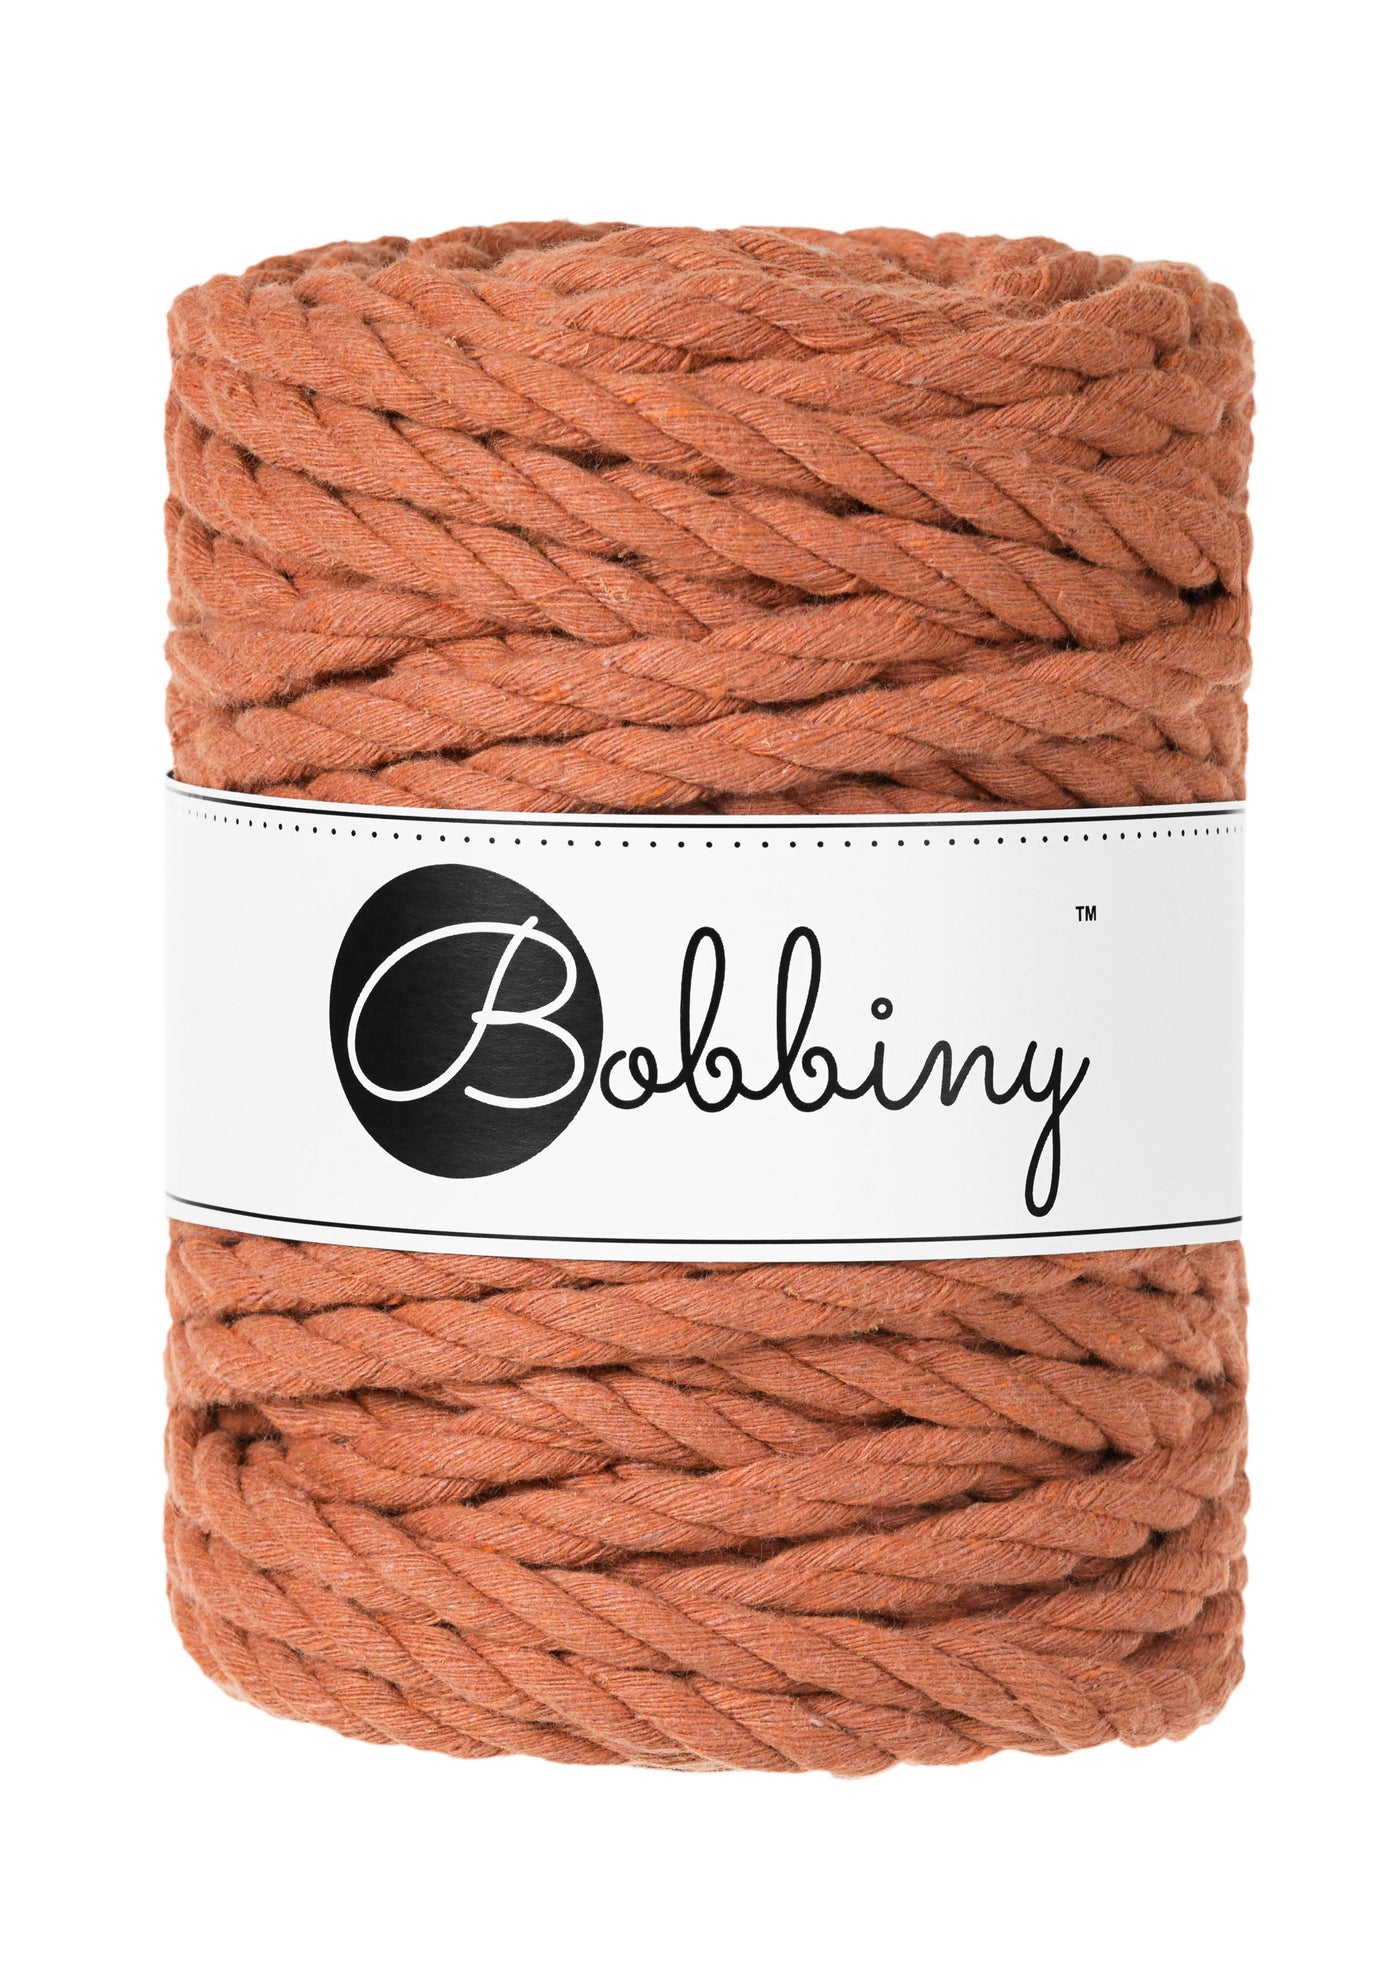 This superb product from Bobbiny is an amazing addition to their gorgeous range of products.  Shown here in the ever popular shade of 'Terracotta'  Made from 100% recycled cotton, it is perfect for Macrame projects due to its sturdiness. They are non-toxic, certified safe for children and meet certified worldwide textile standards.  This super soft triple twist rope also makes the most spectacular fringes and tassels.  